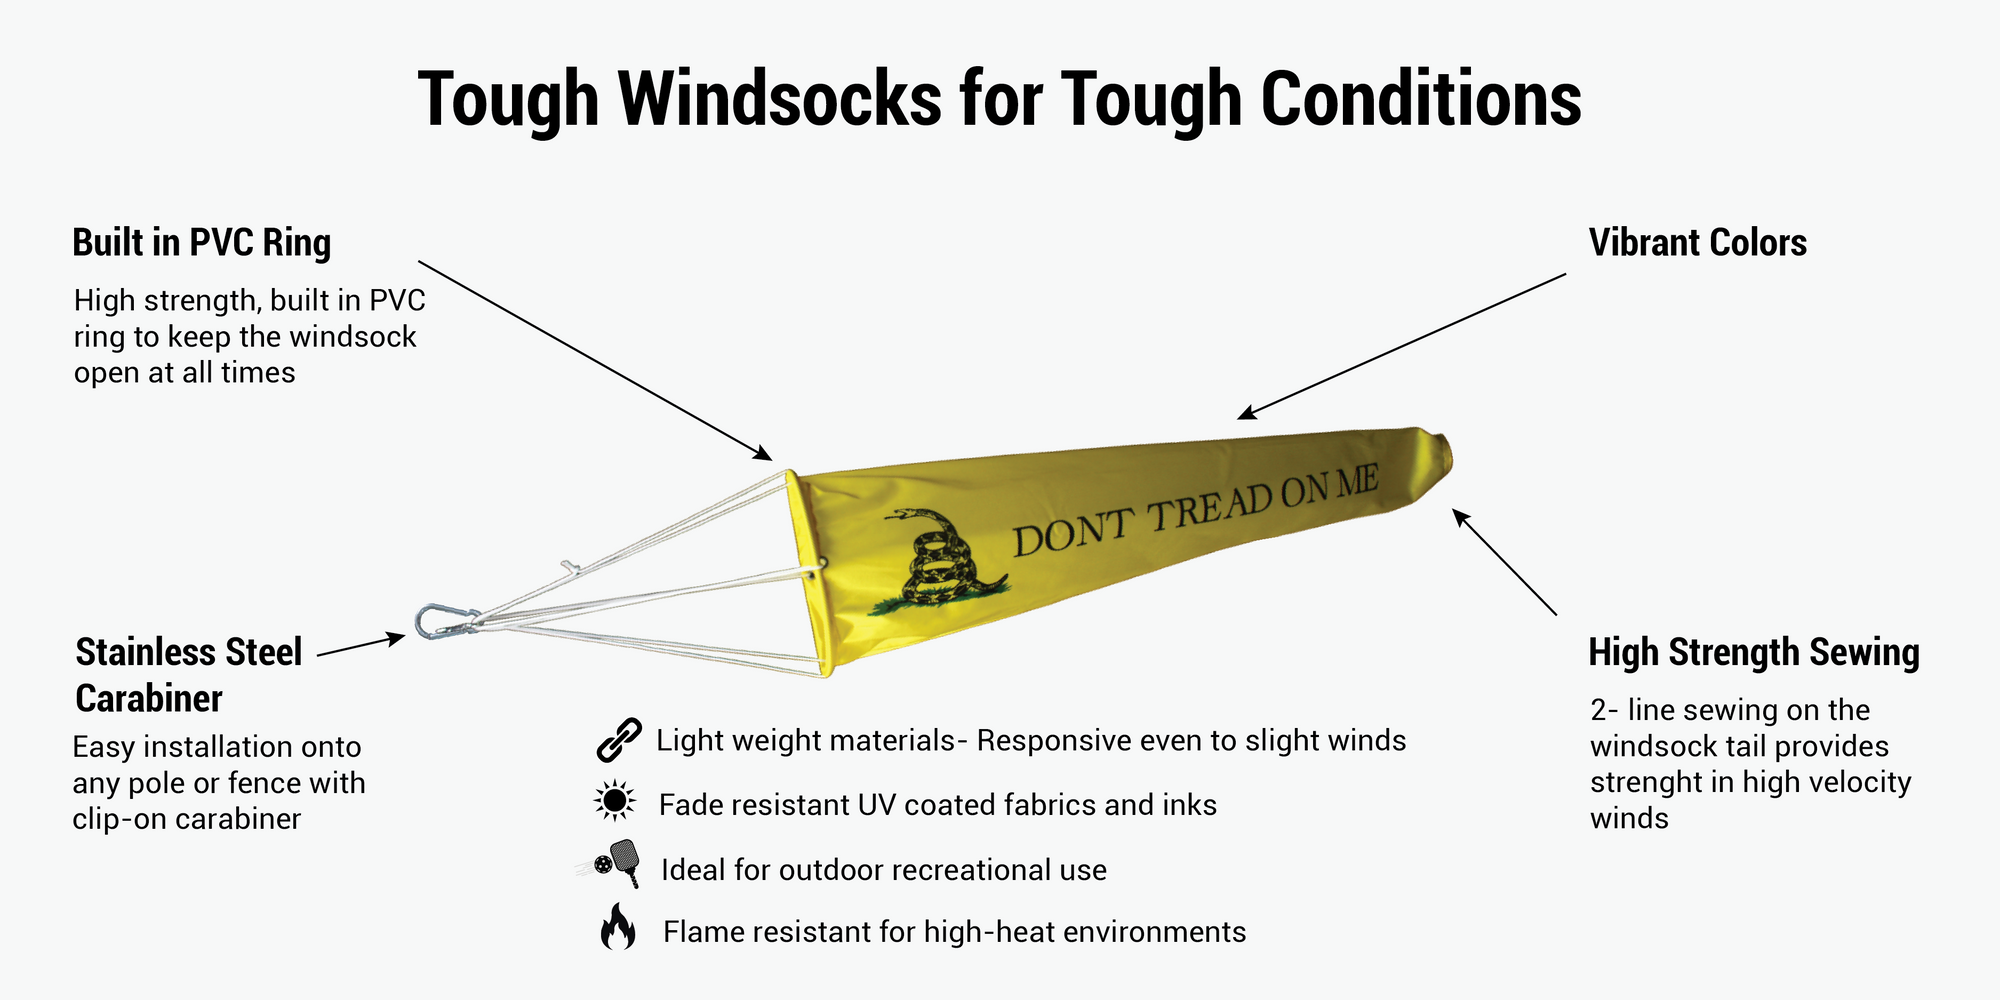 Gadsden Don't Tread on Me light weight windsock infographic for residential and acreage use